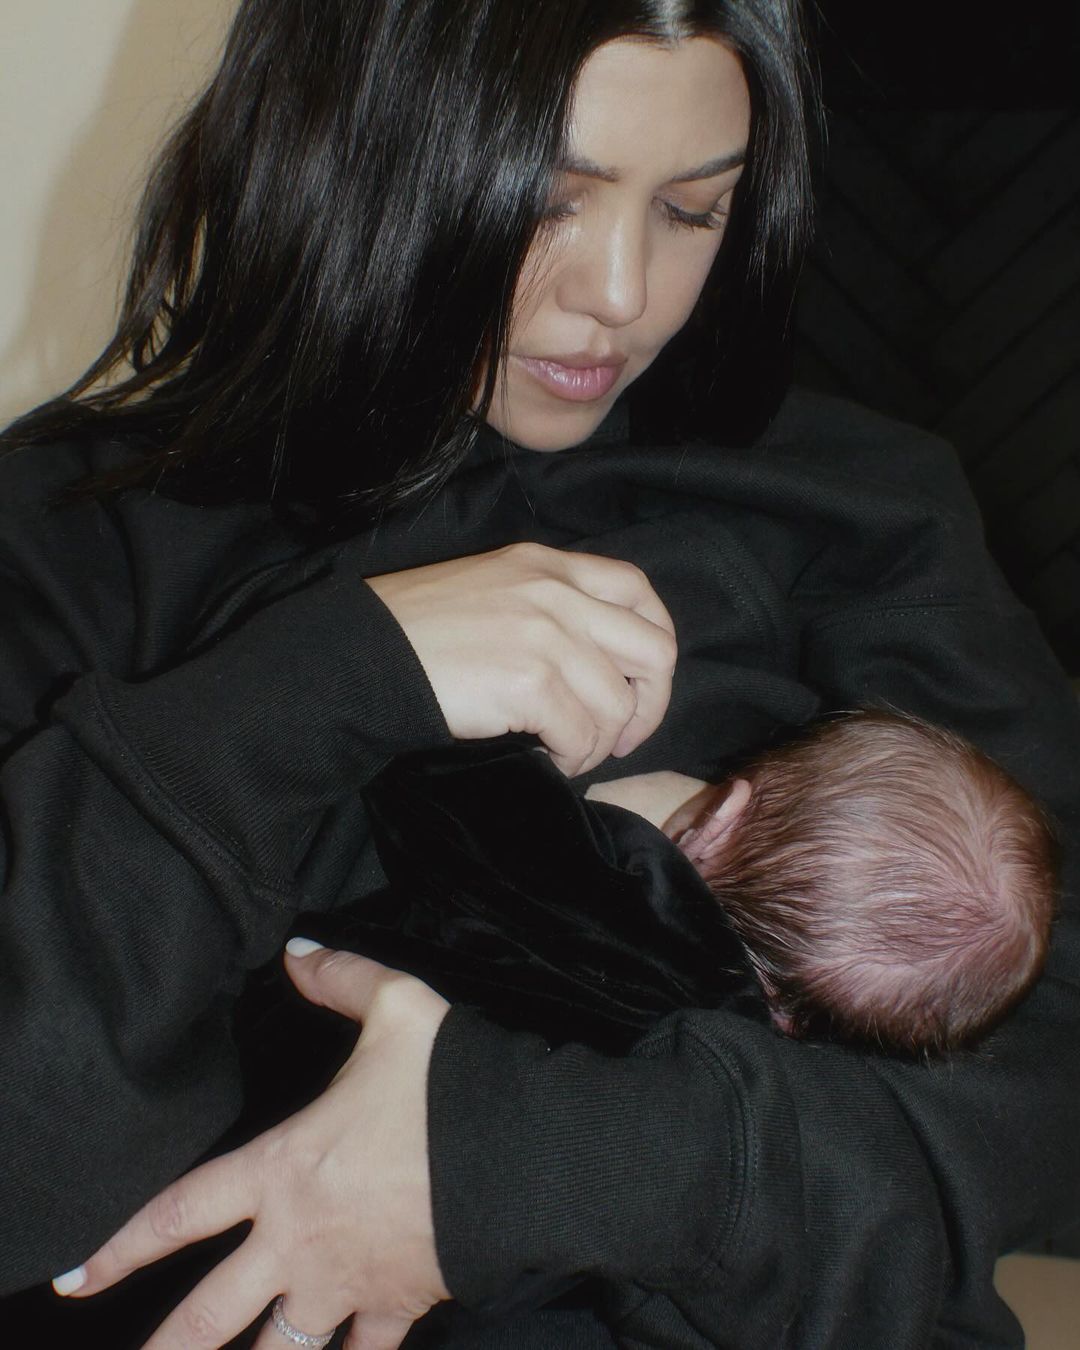 Kourt also shared an intimate snap breastfeeding her new baby